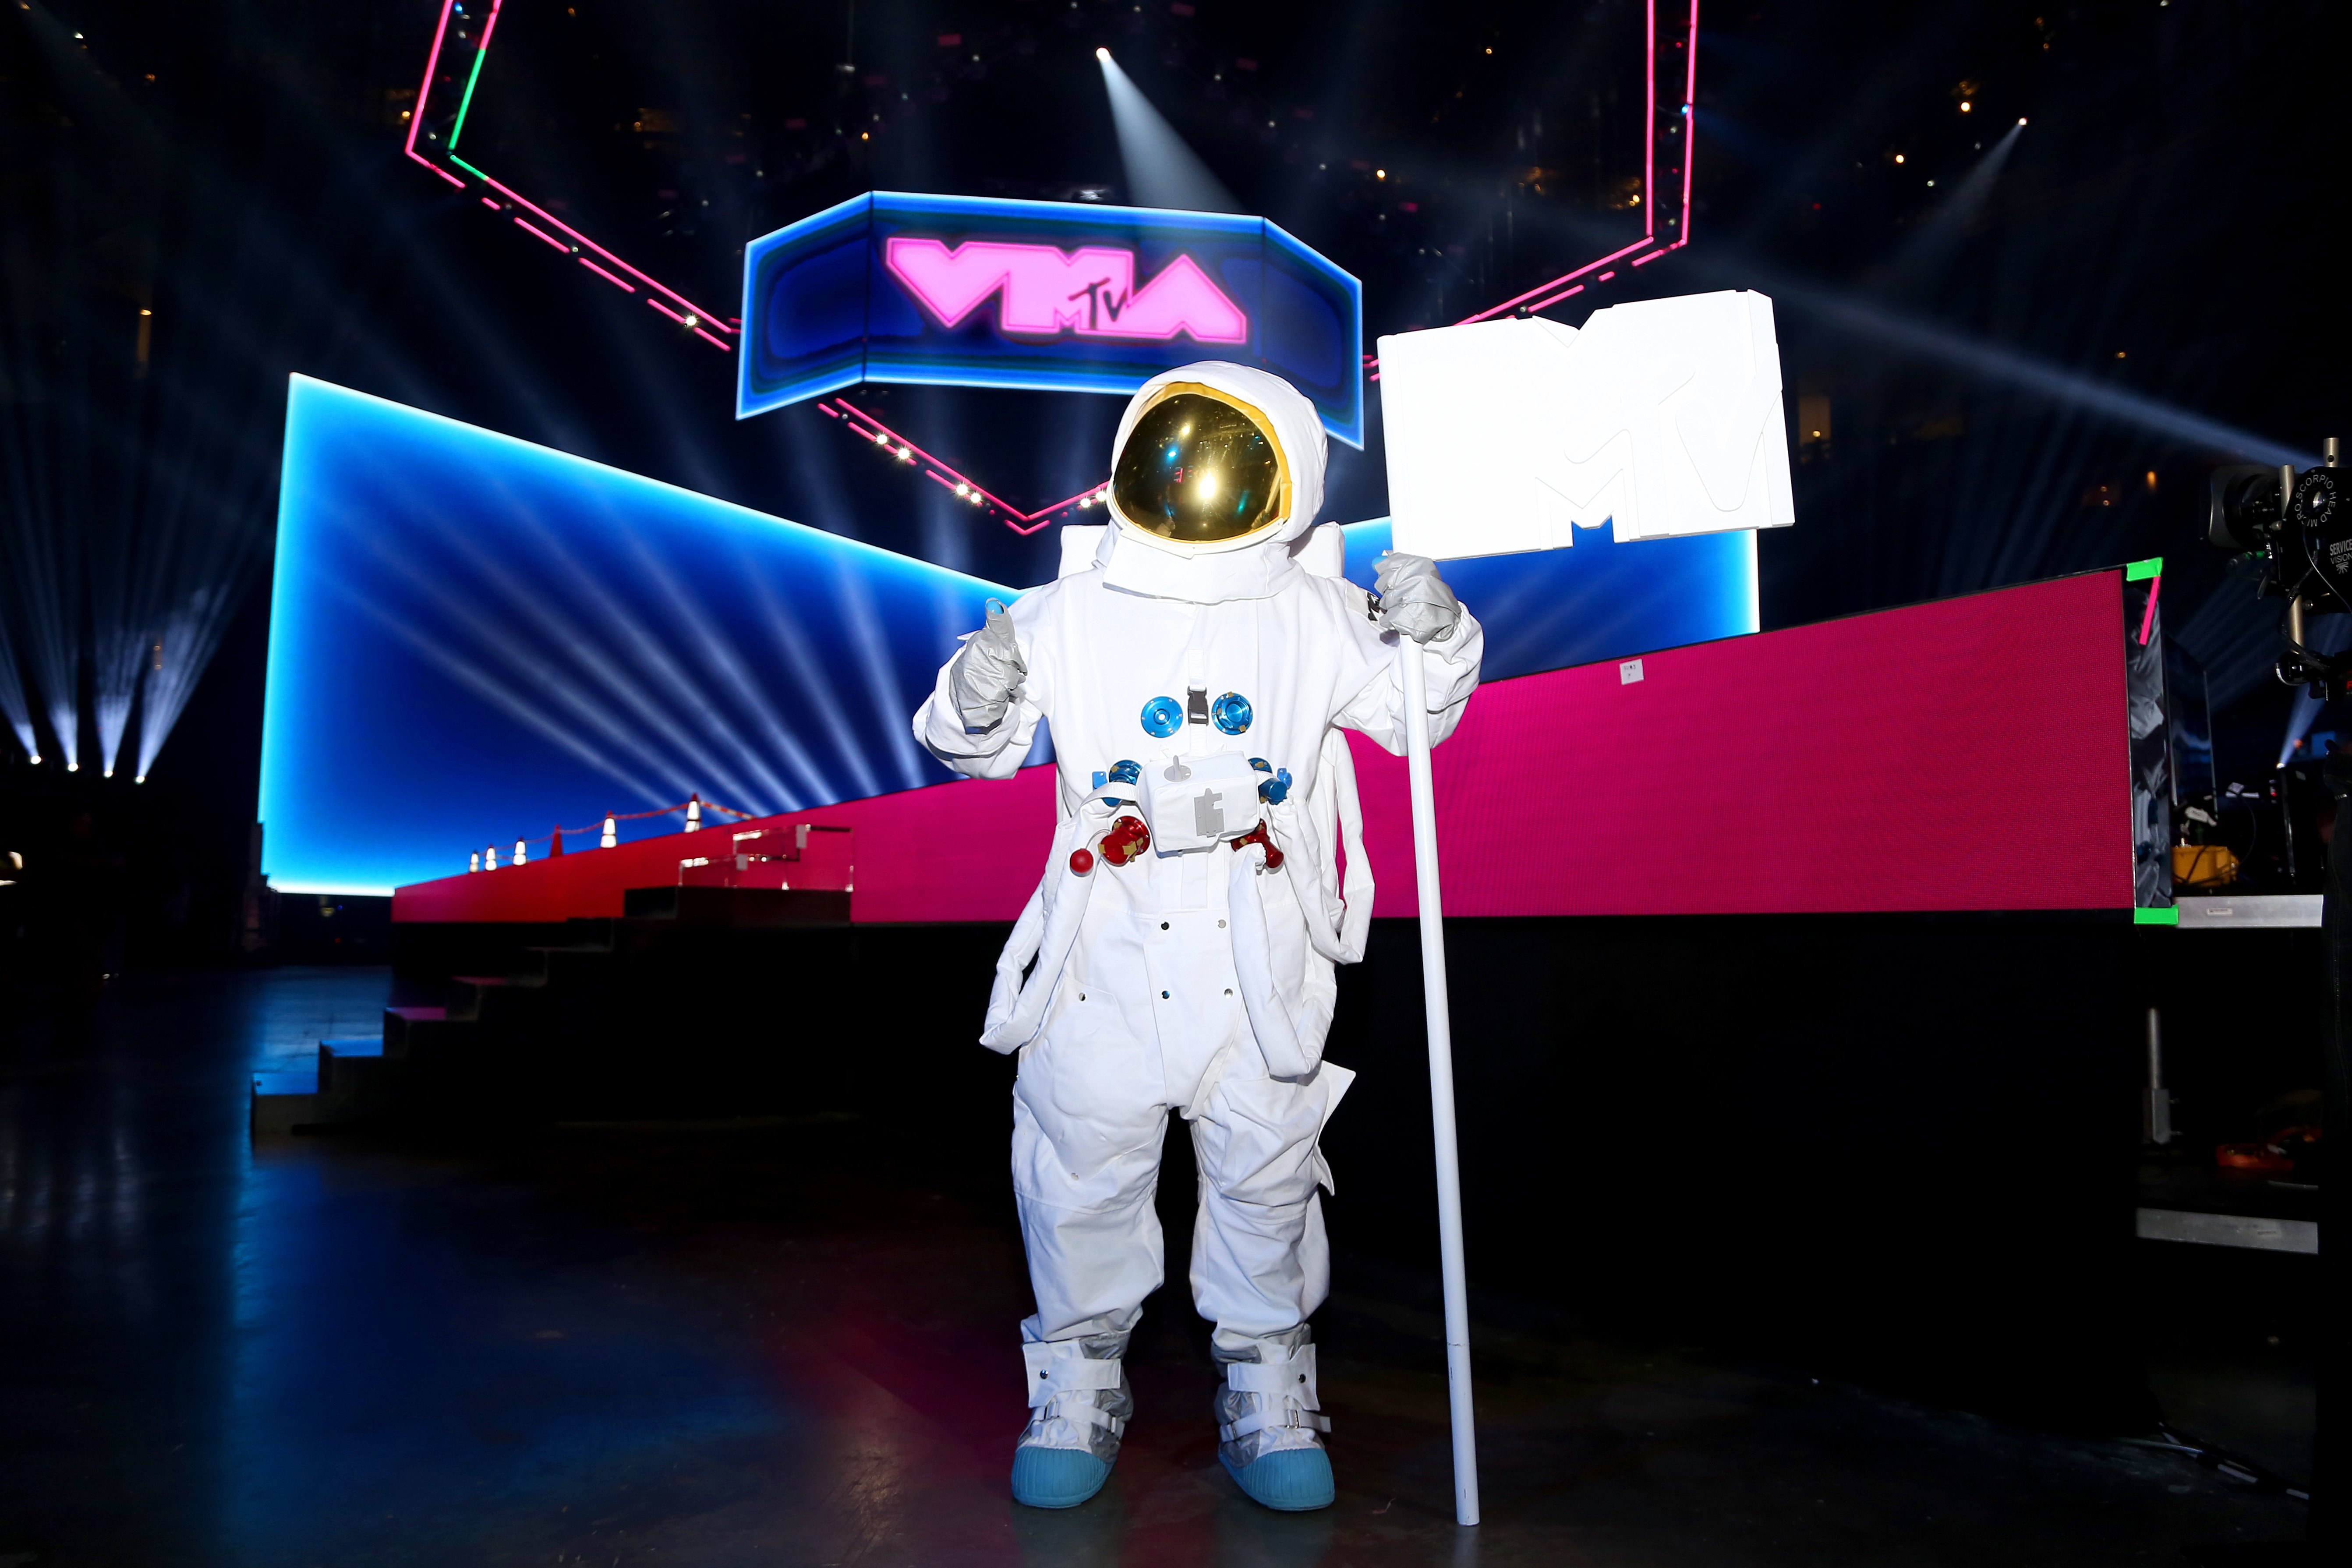 MTV Moon Man poses on stage during the 2019 MTV Video Music Awards